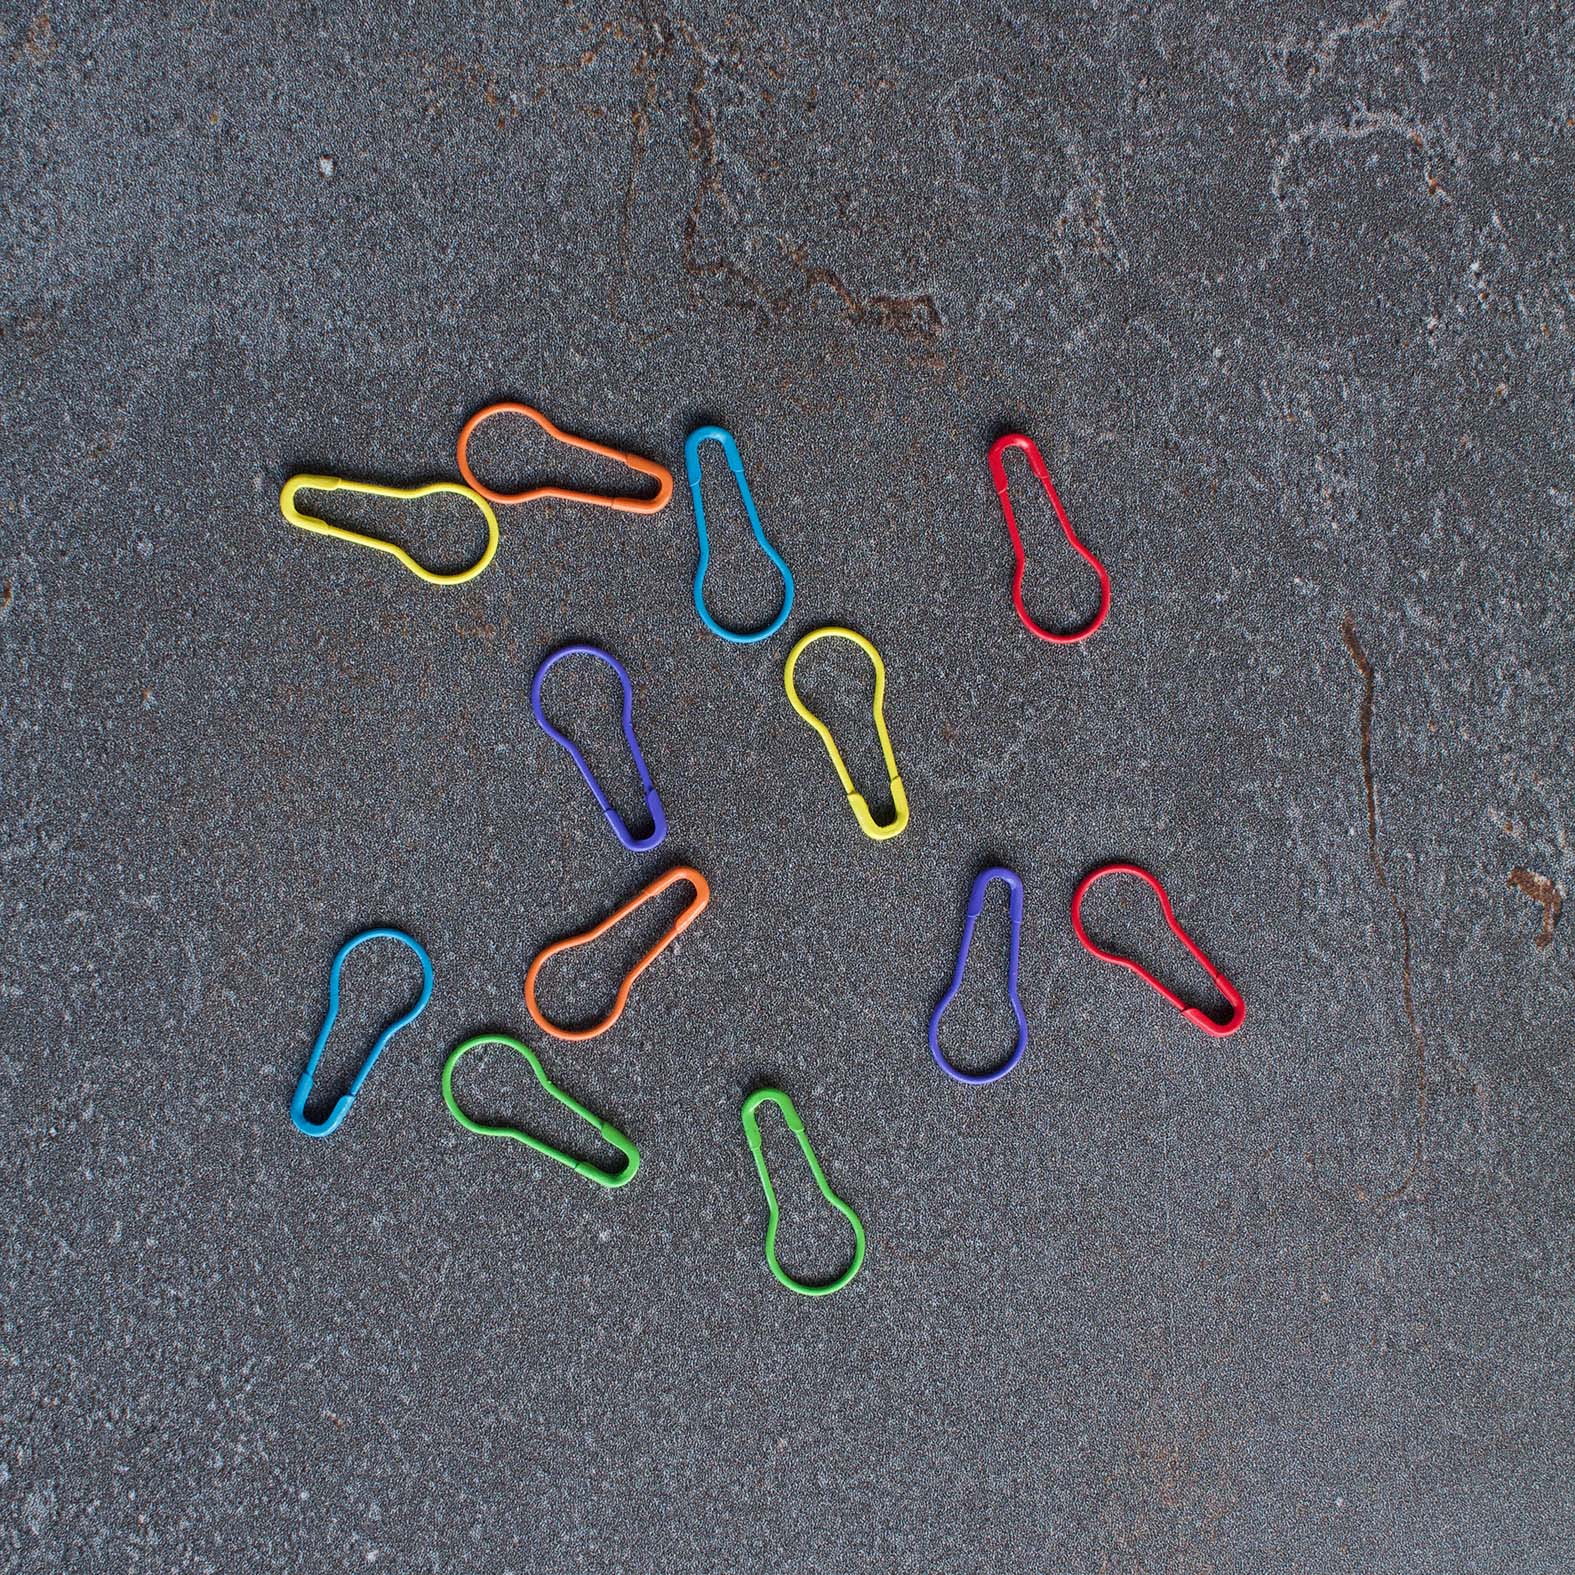 Multi-coloured Knitter's Safety Pins